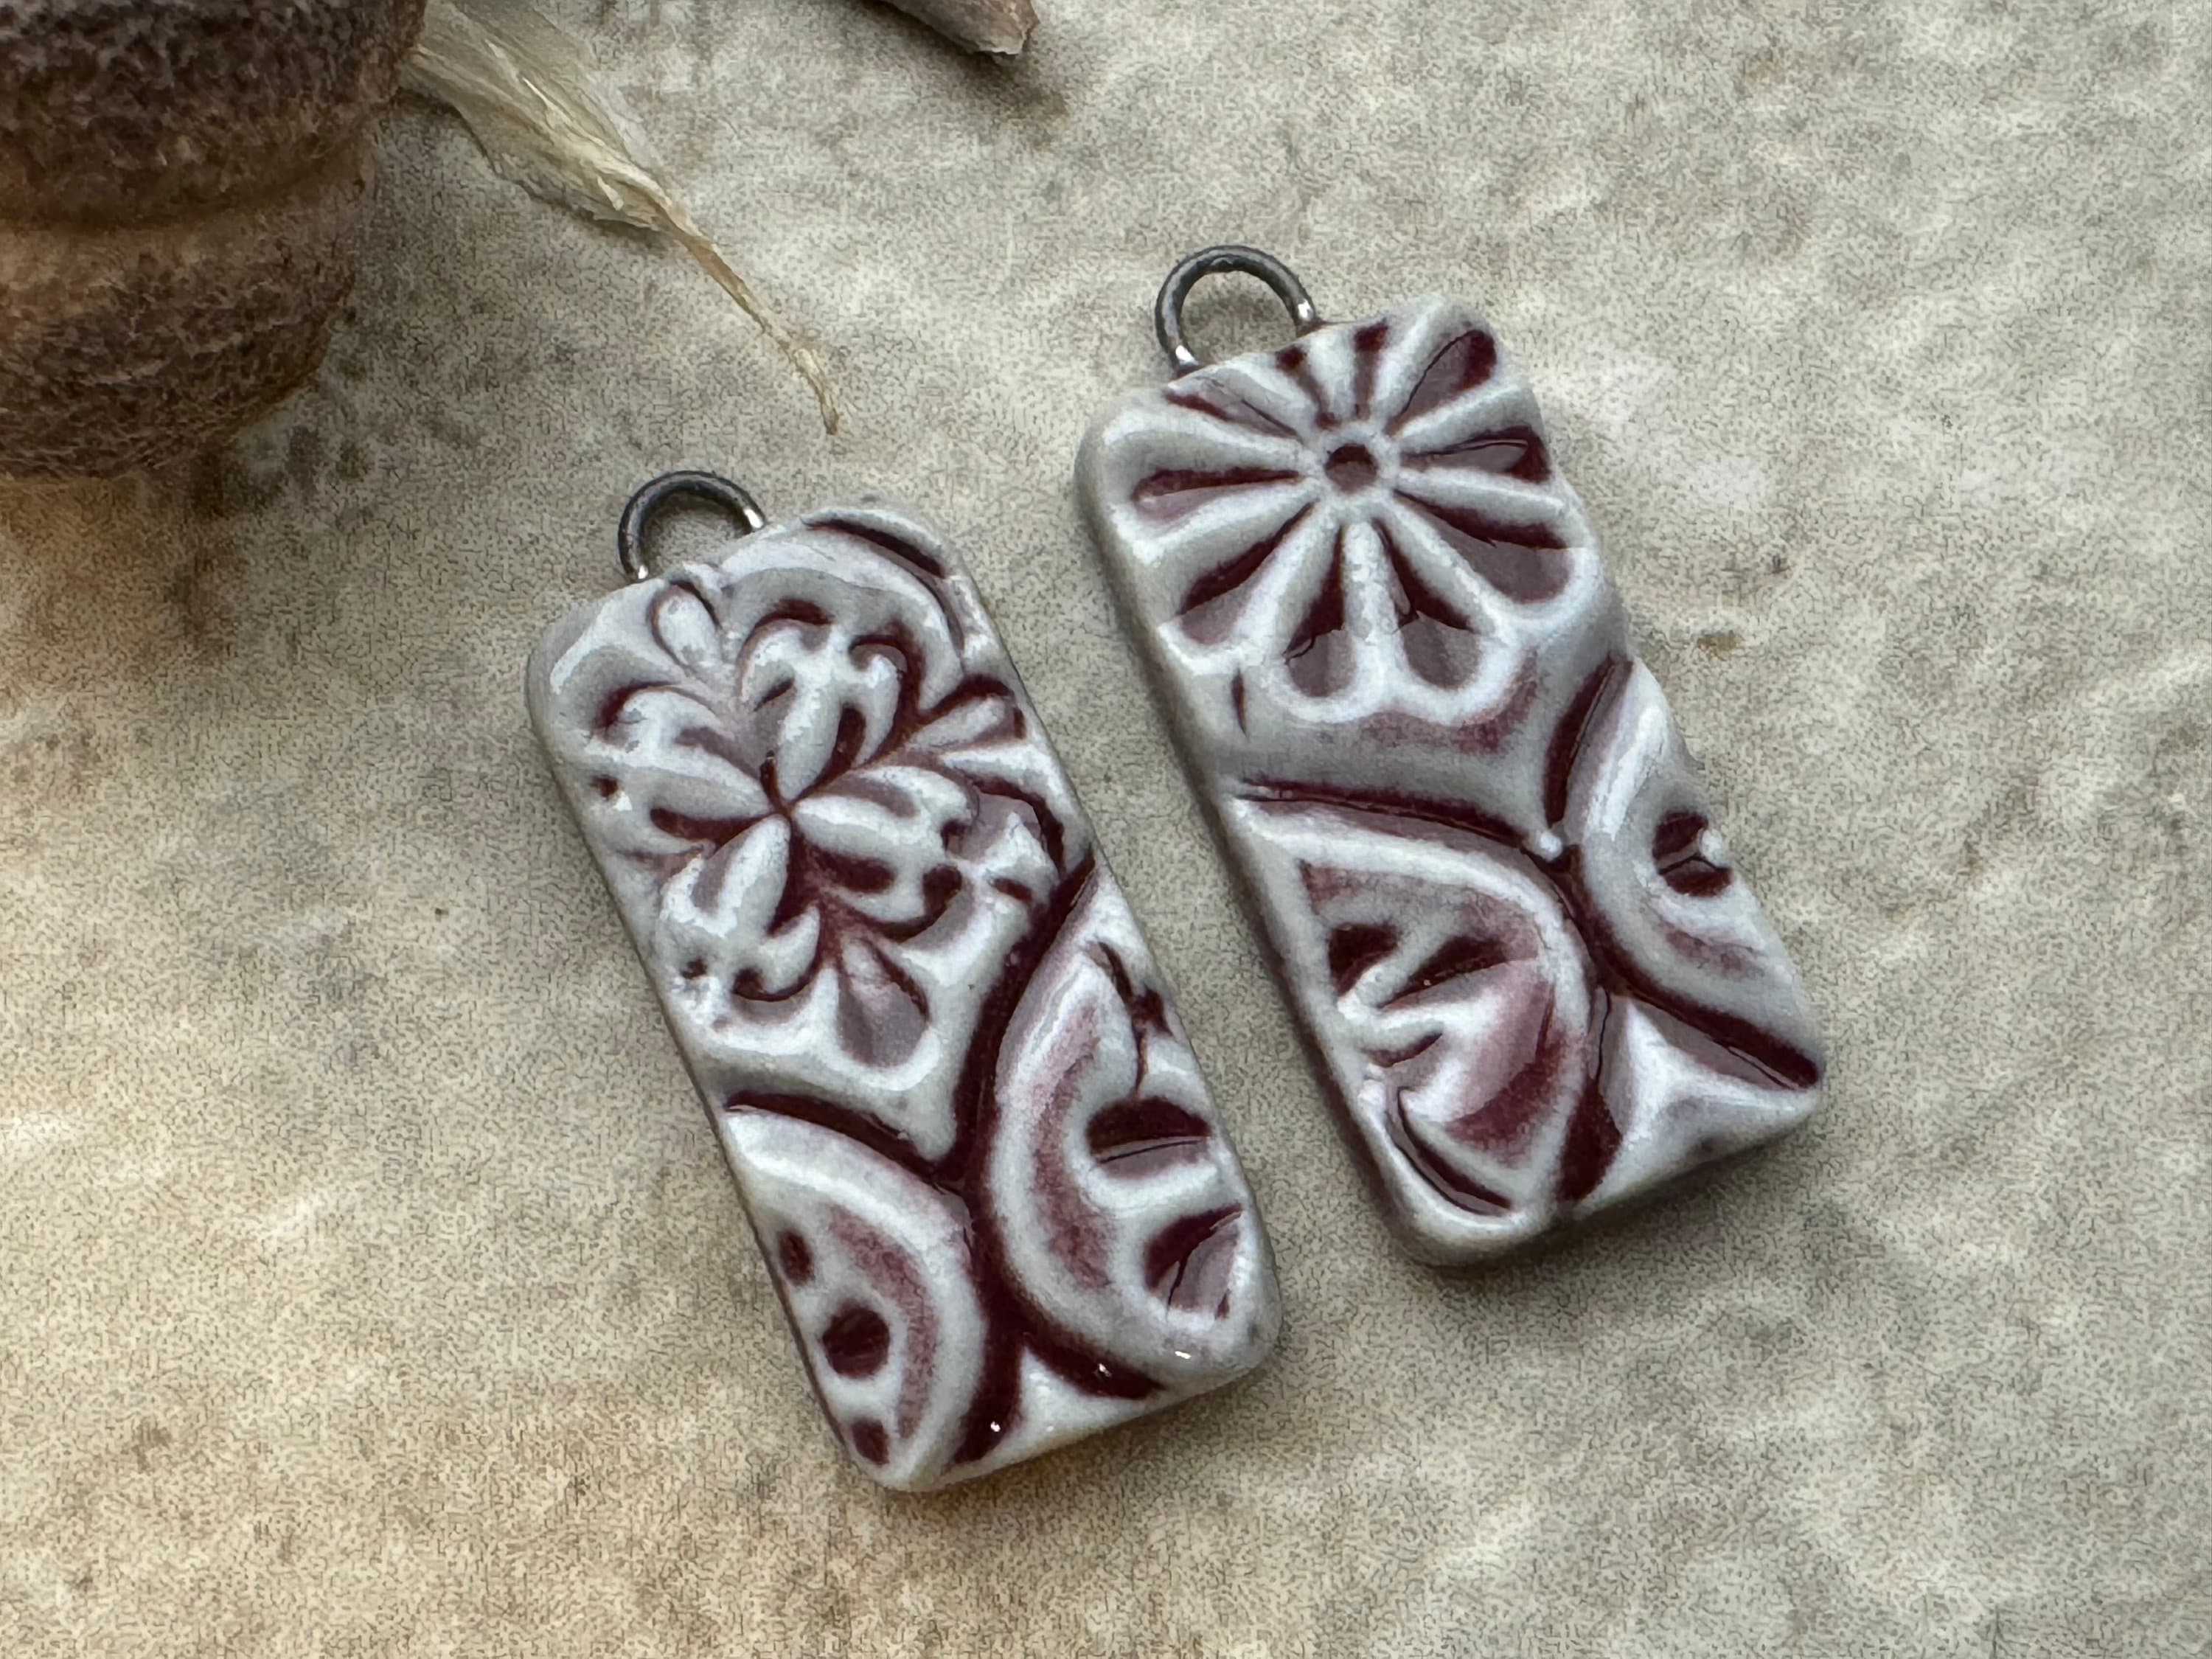 Burgundy Talavera Bead, Mexican Style Tile Beads, Earring Bead Pair, Porcelain Ceramic Charms, Jewelry Components, Beading Handmade